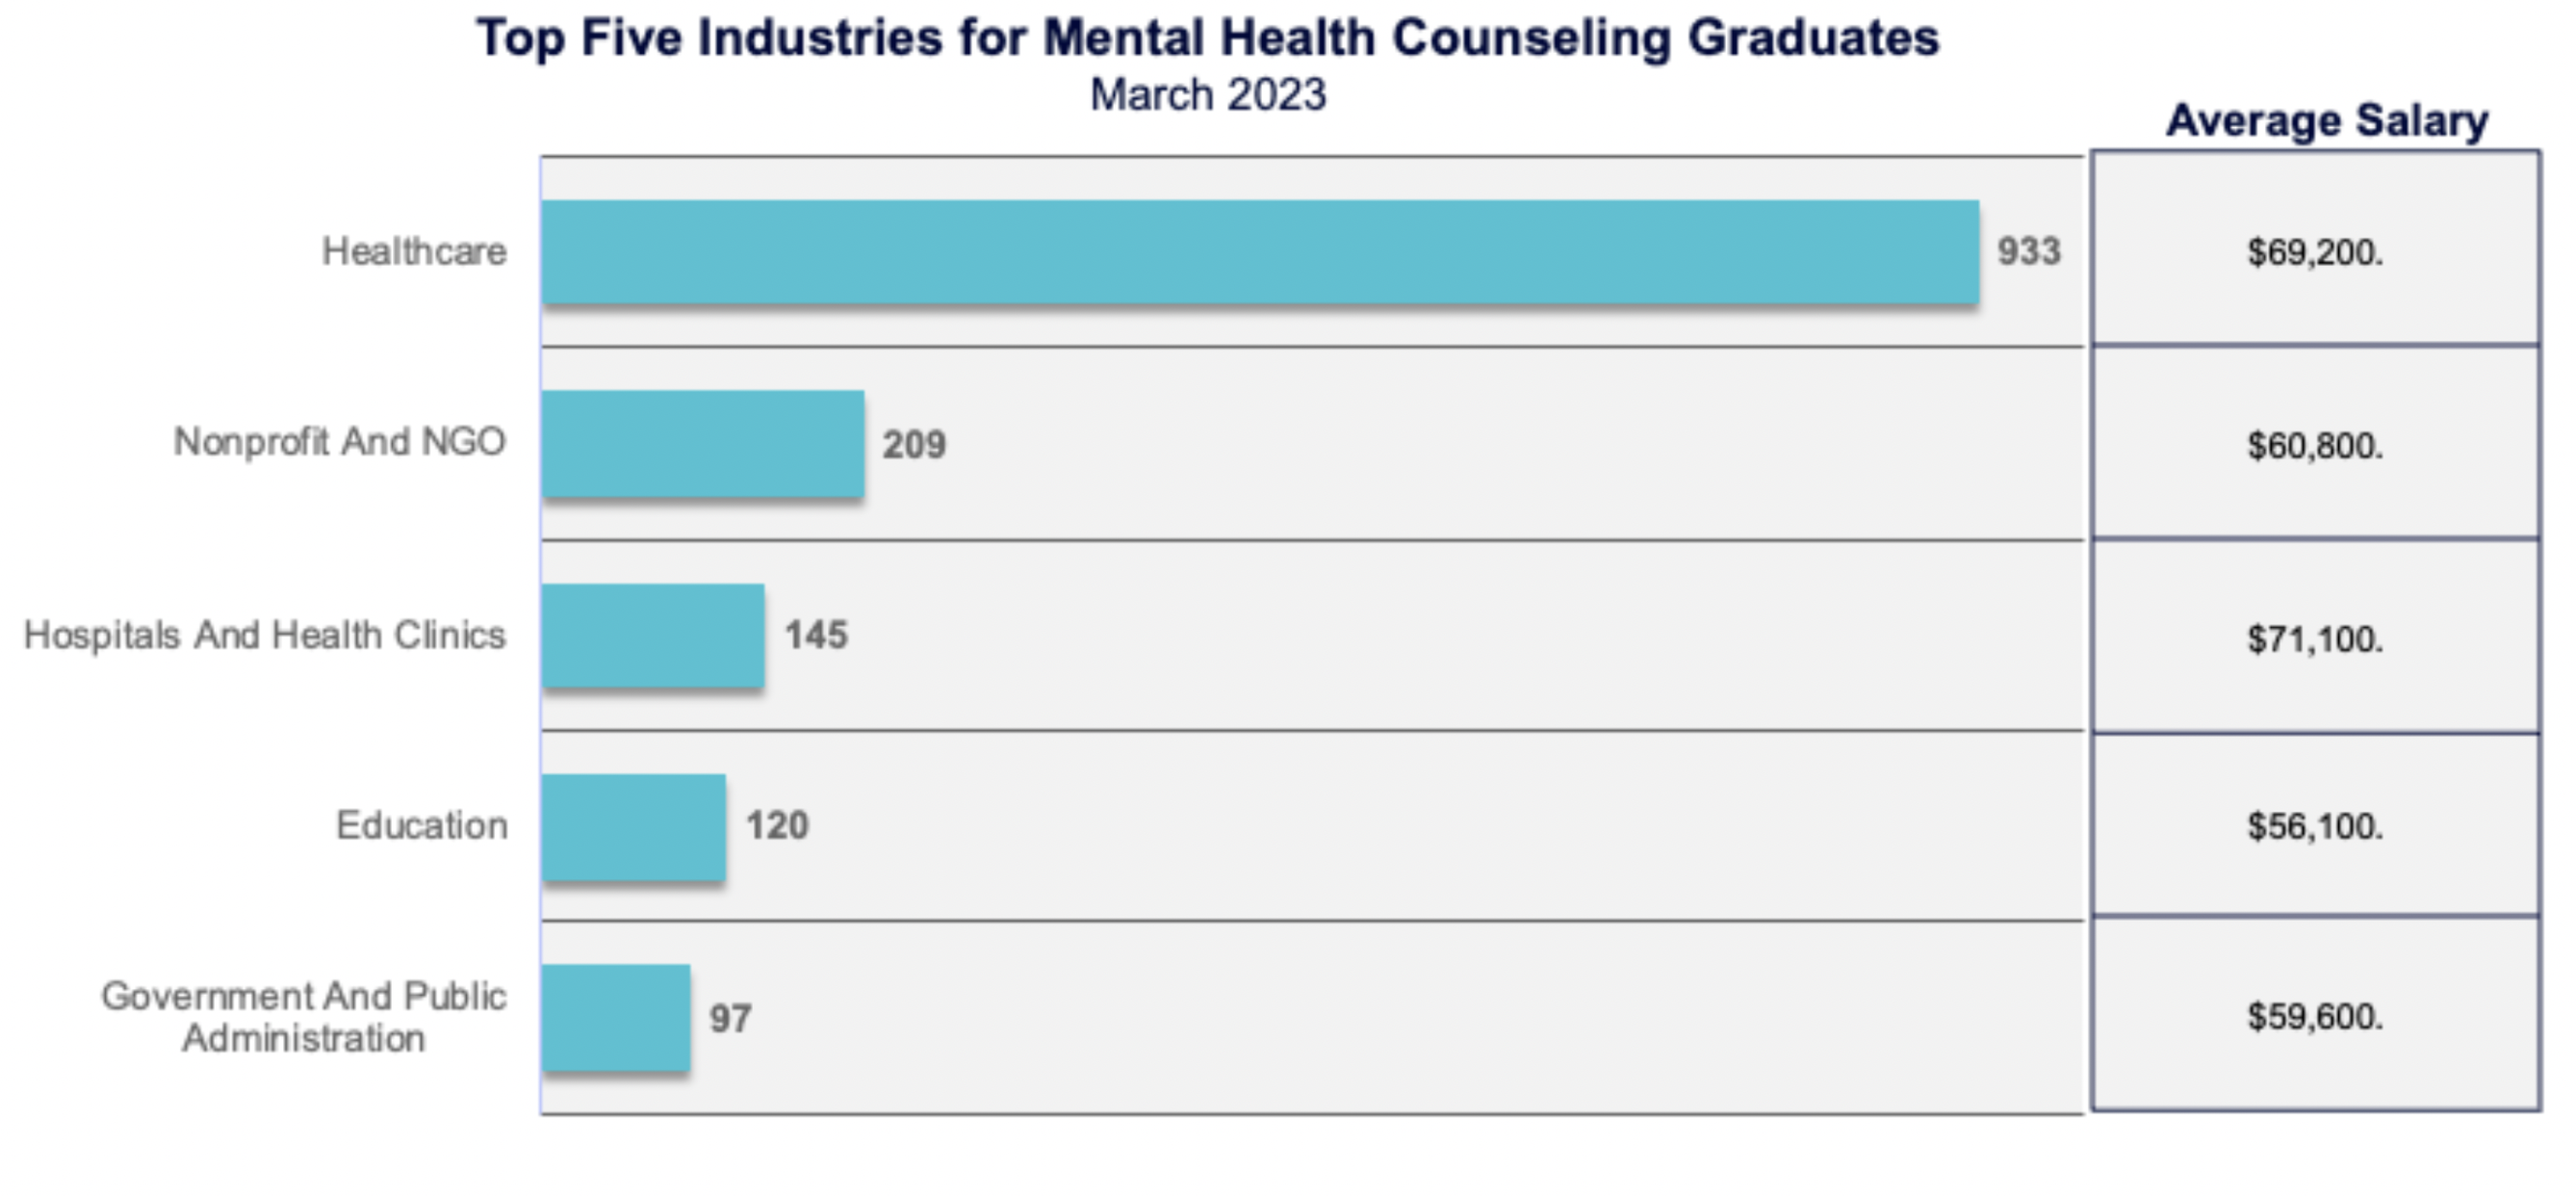 Top Five Industries for Mental Health Counseling Graduates: March 2023